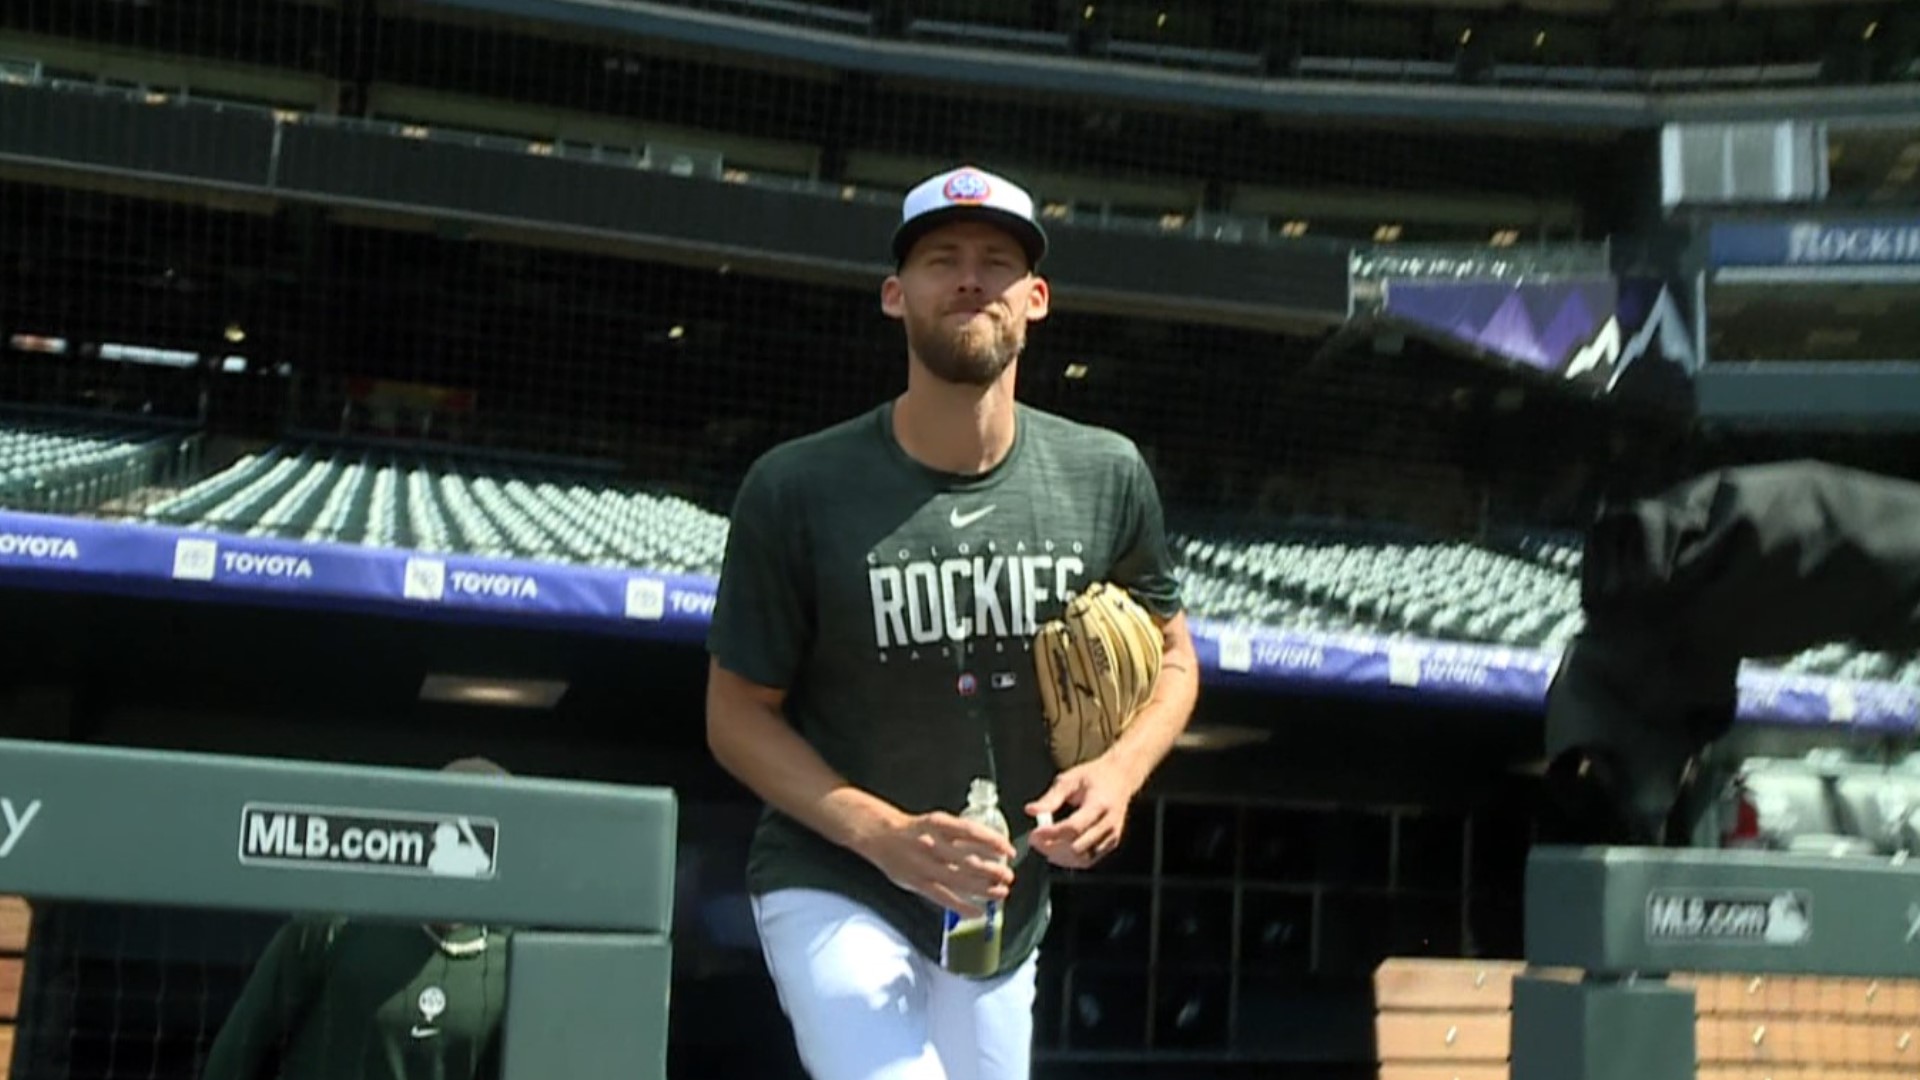 Rockies relief pitcher Daniel Bard started the season on the 15-day Injured List with anxiety. He battled the disorder more than a decade ago in Boston.